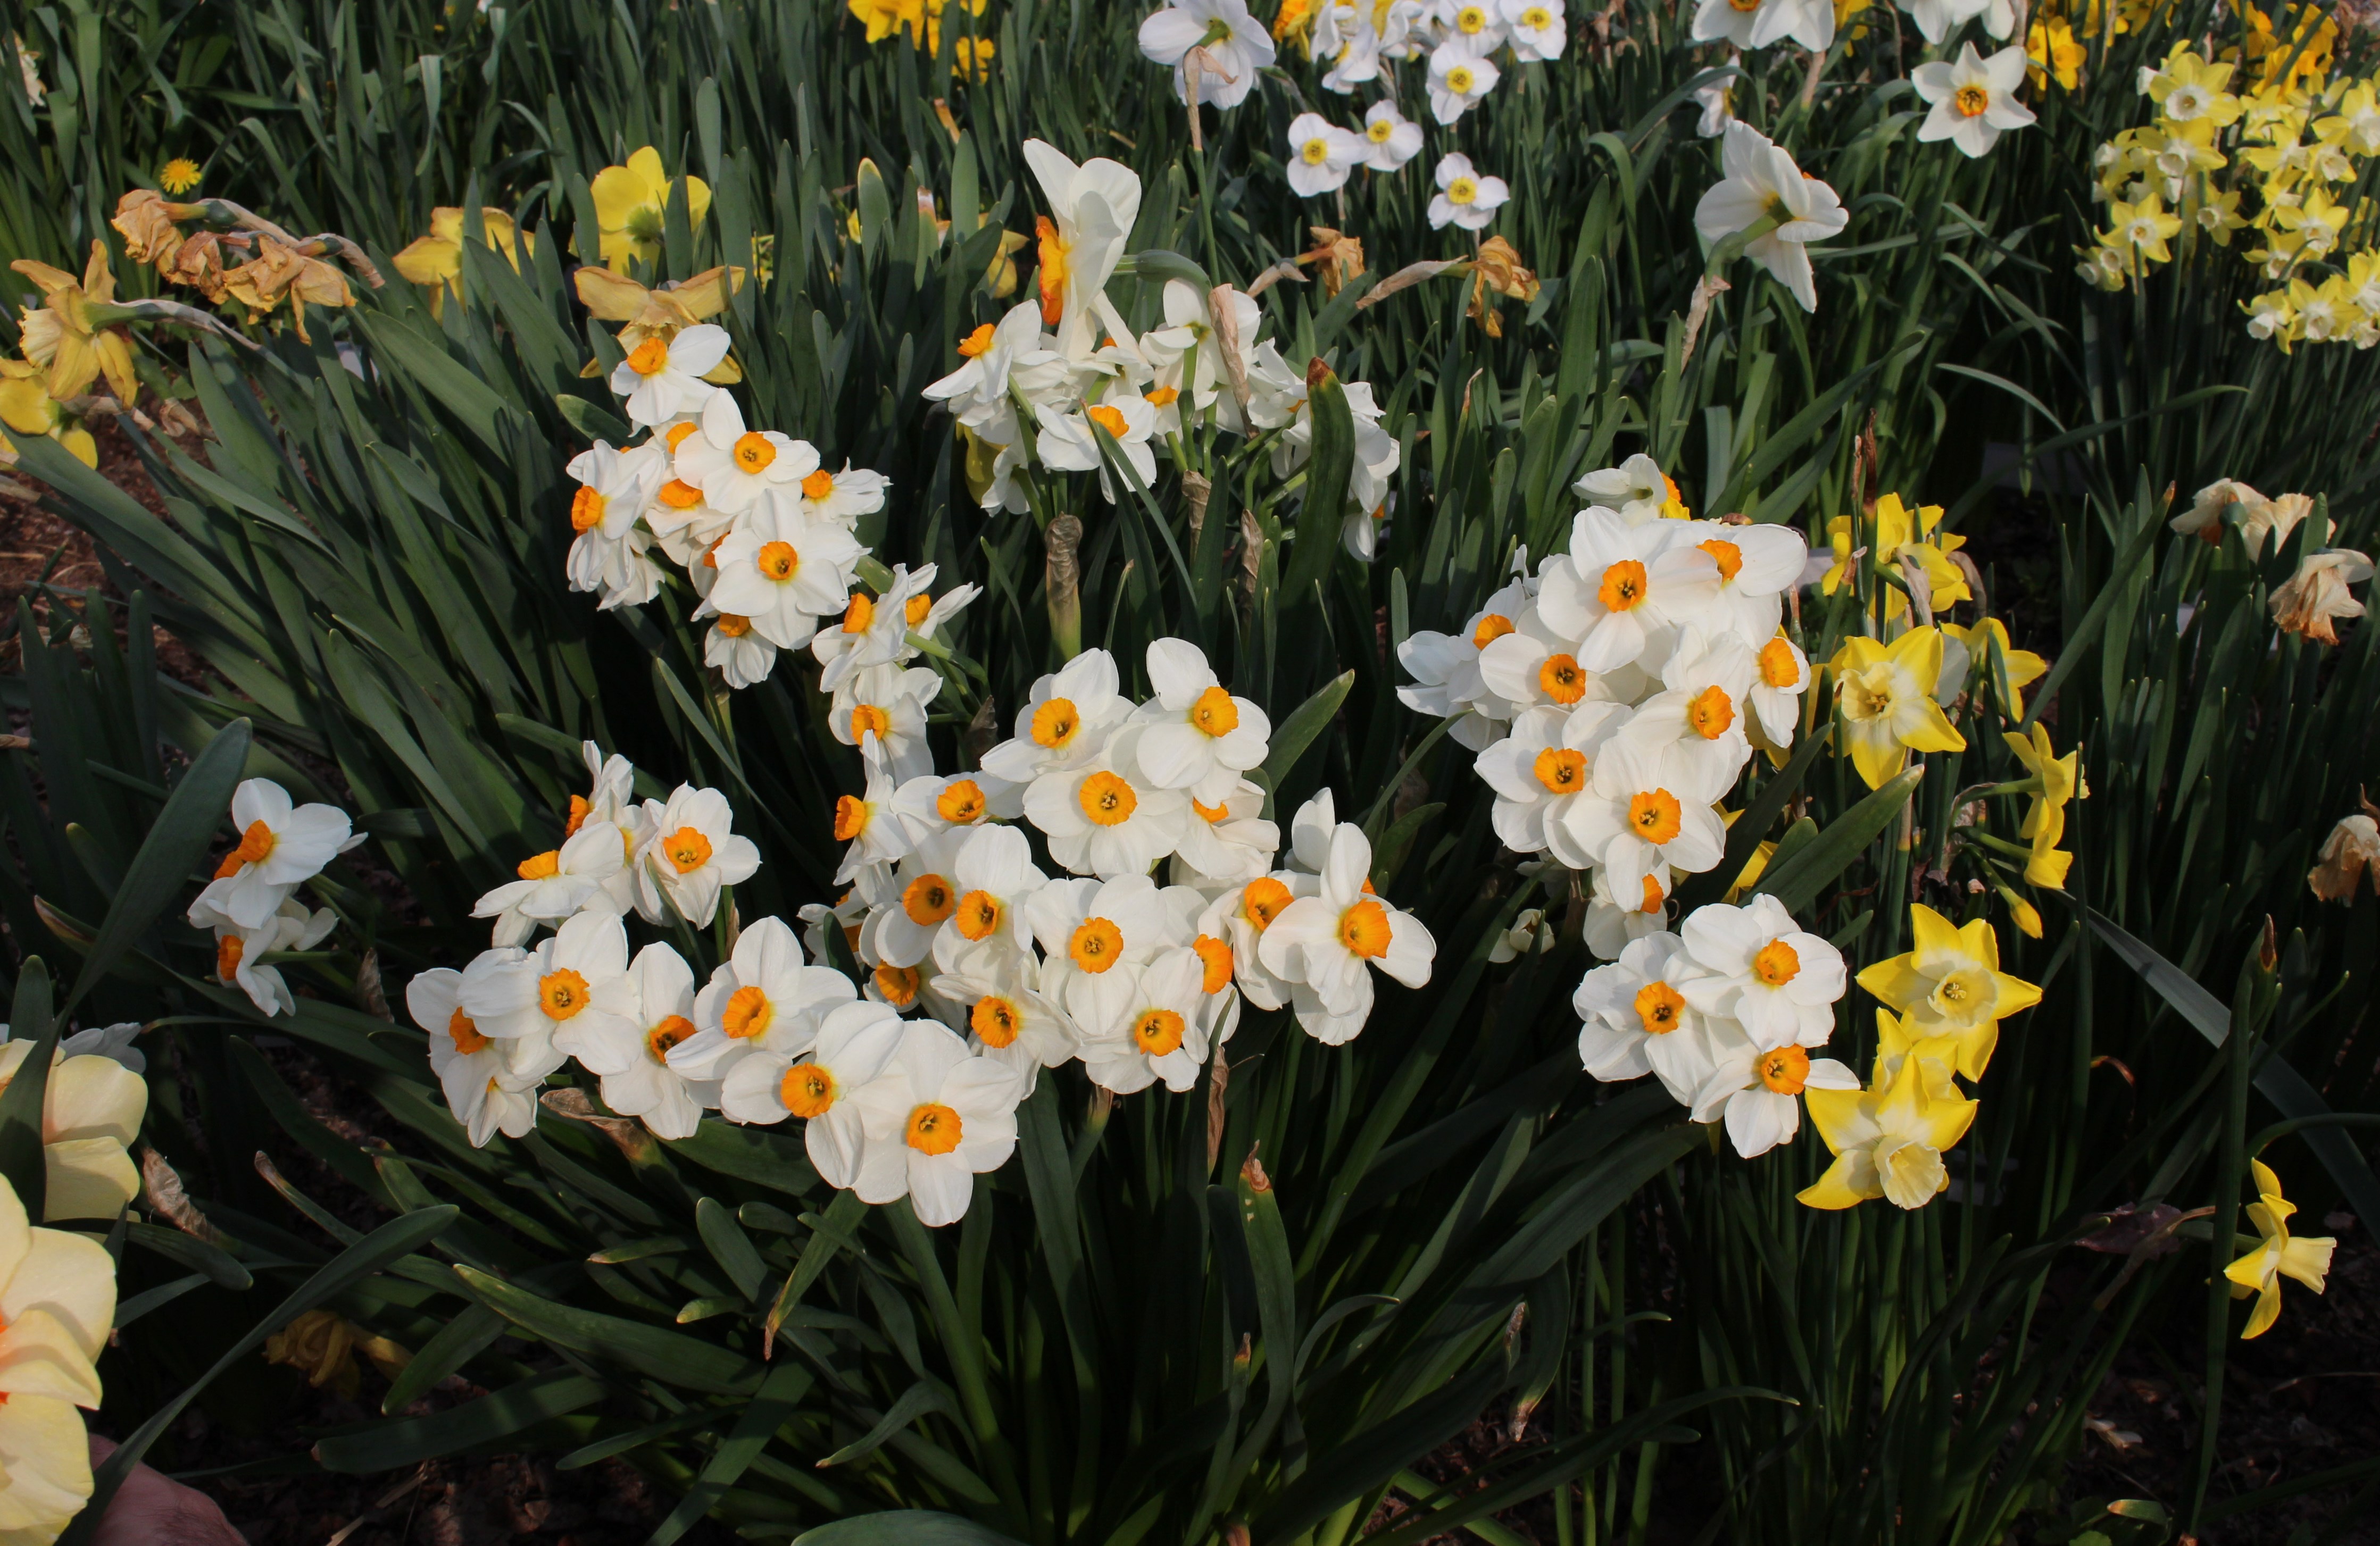 Narcissus “Geranium” can also be had in a double version Sir 